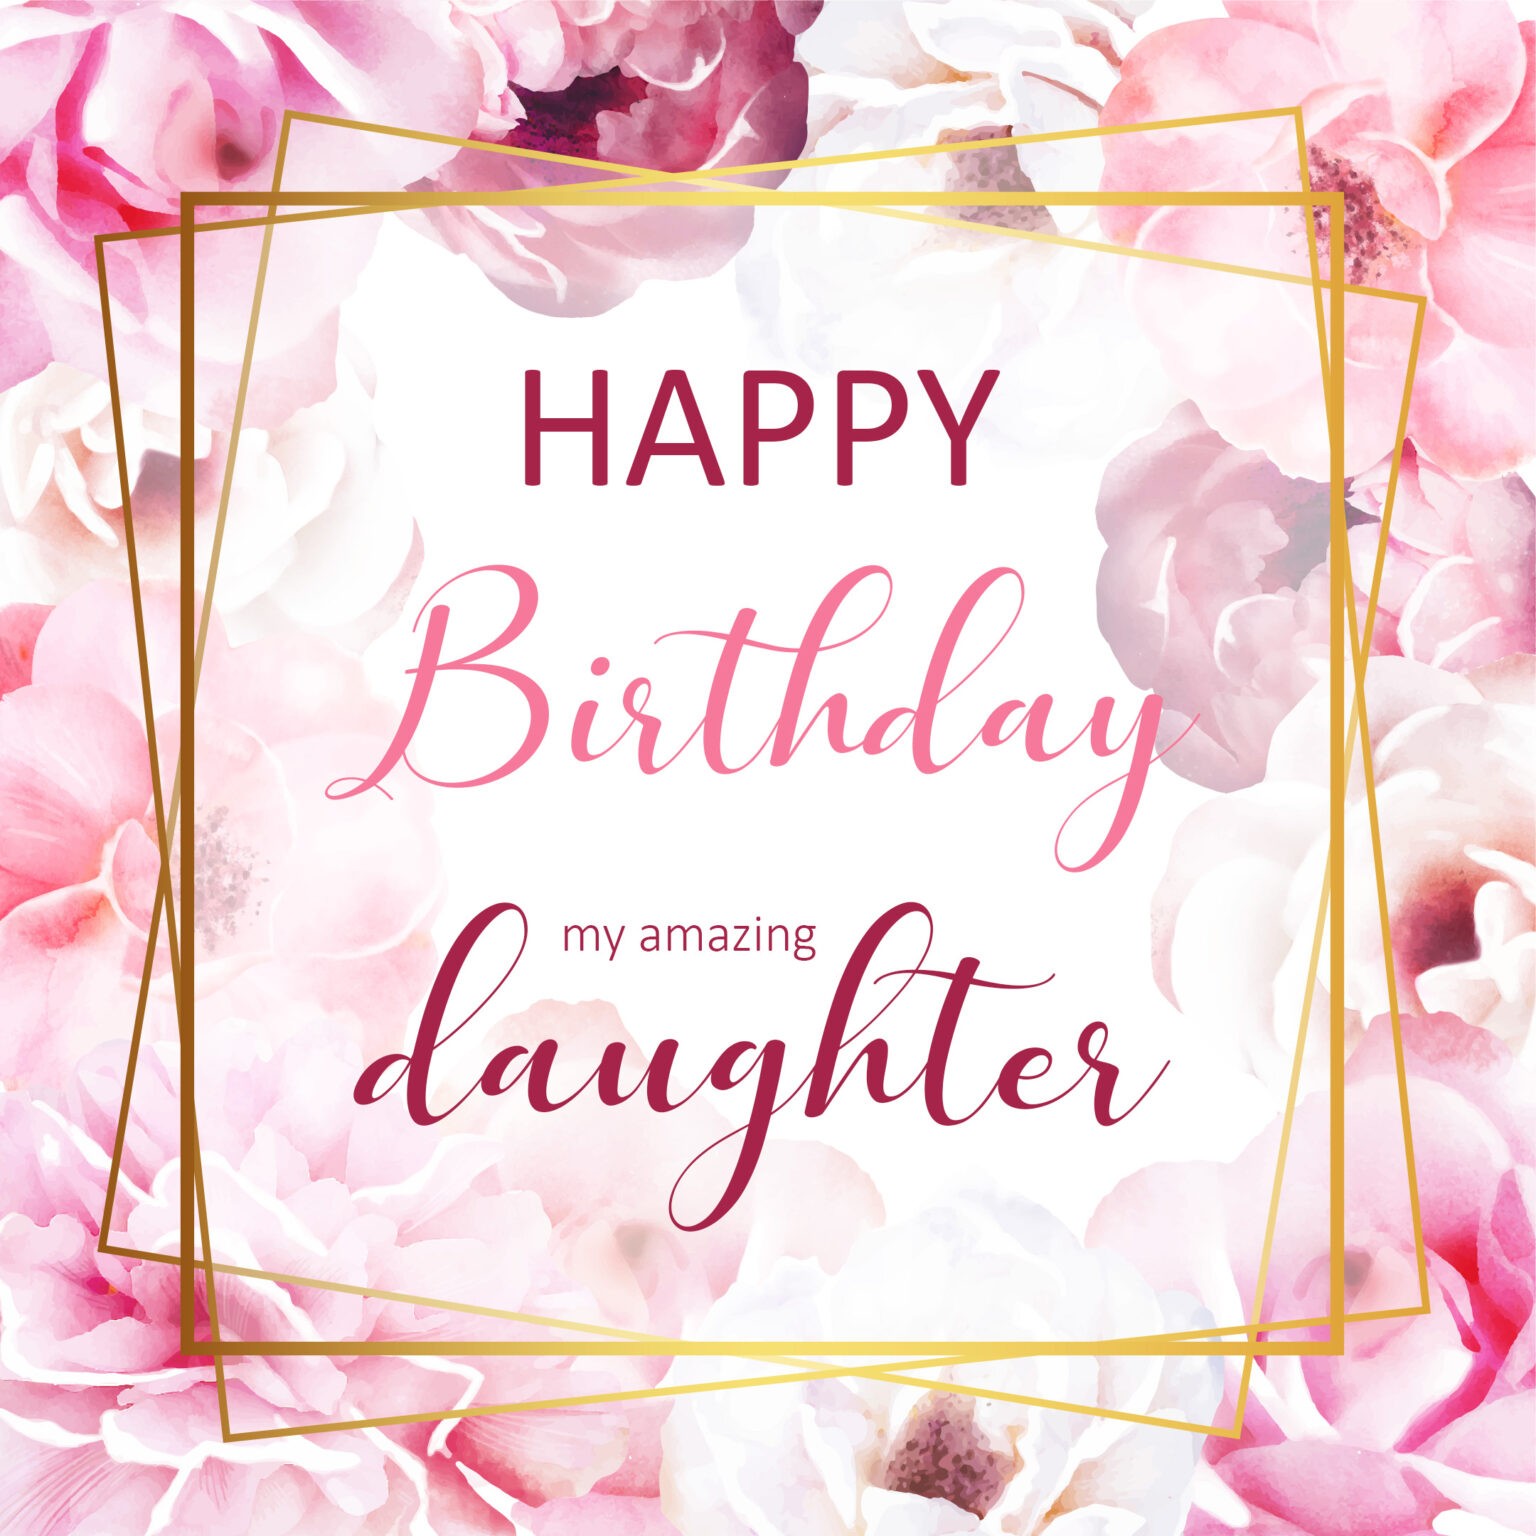 happy-birthday-pics-beautiful-wishes-quotes-greeting-cards-sayings-birthday-wishes-for